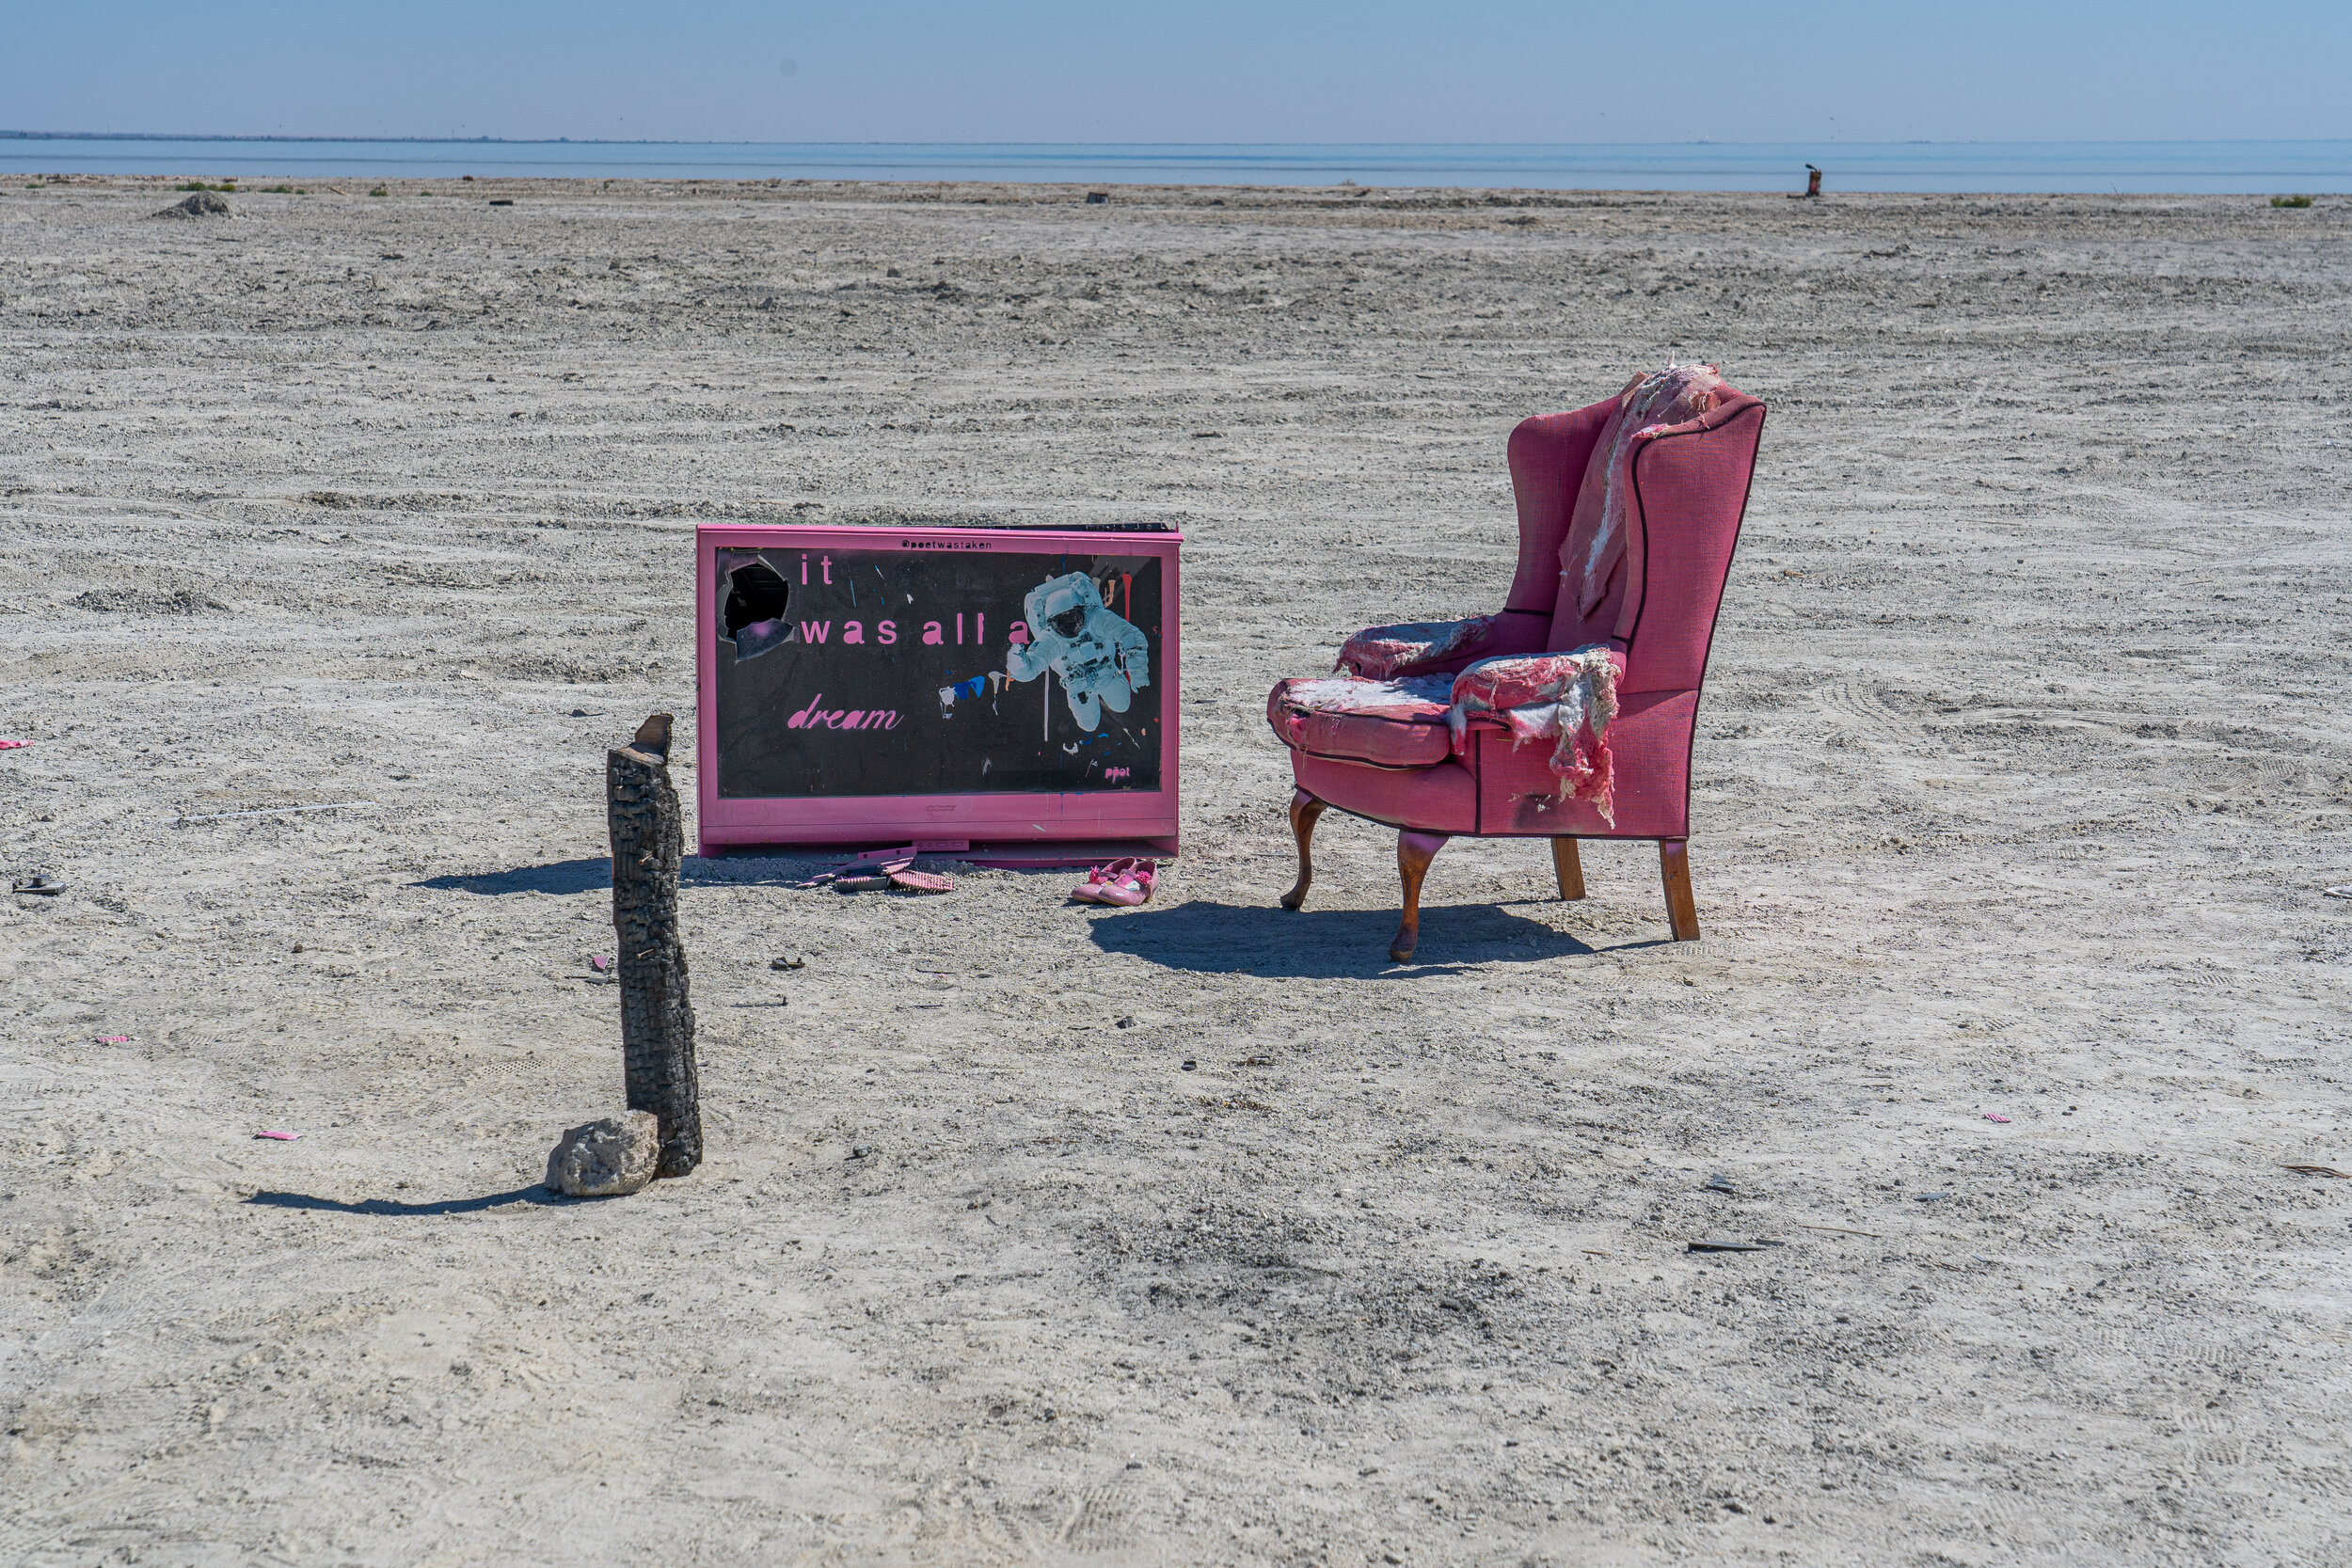  As everything died in the Salton Sea, the once sought after land became a liability to businesses and homeowners. Vacation homes were abandoned, vandalized, and left to crumble. A flood years ago dispersed the contents of the abandoned houses, givin